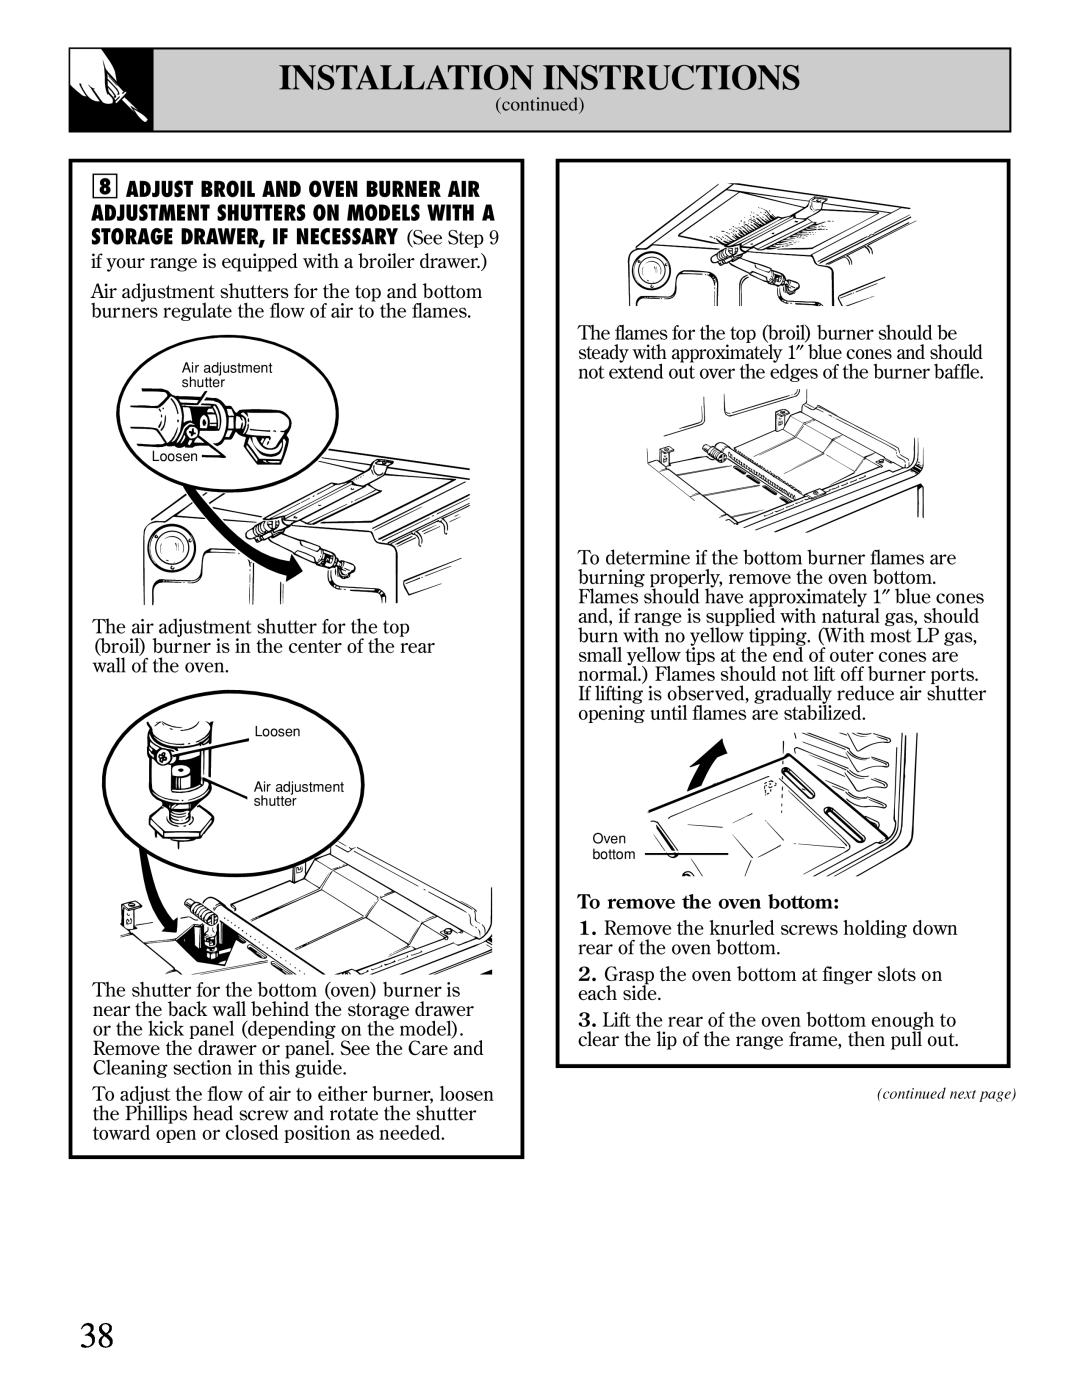 GE XL44 Installation Instructions, To remove the oven bottom, Air adjustment shutter Loosen, Loosen Air adjustment shutter 